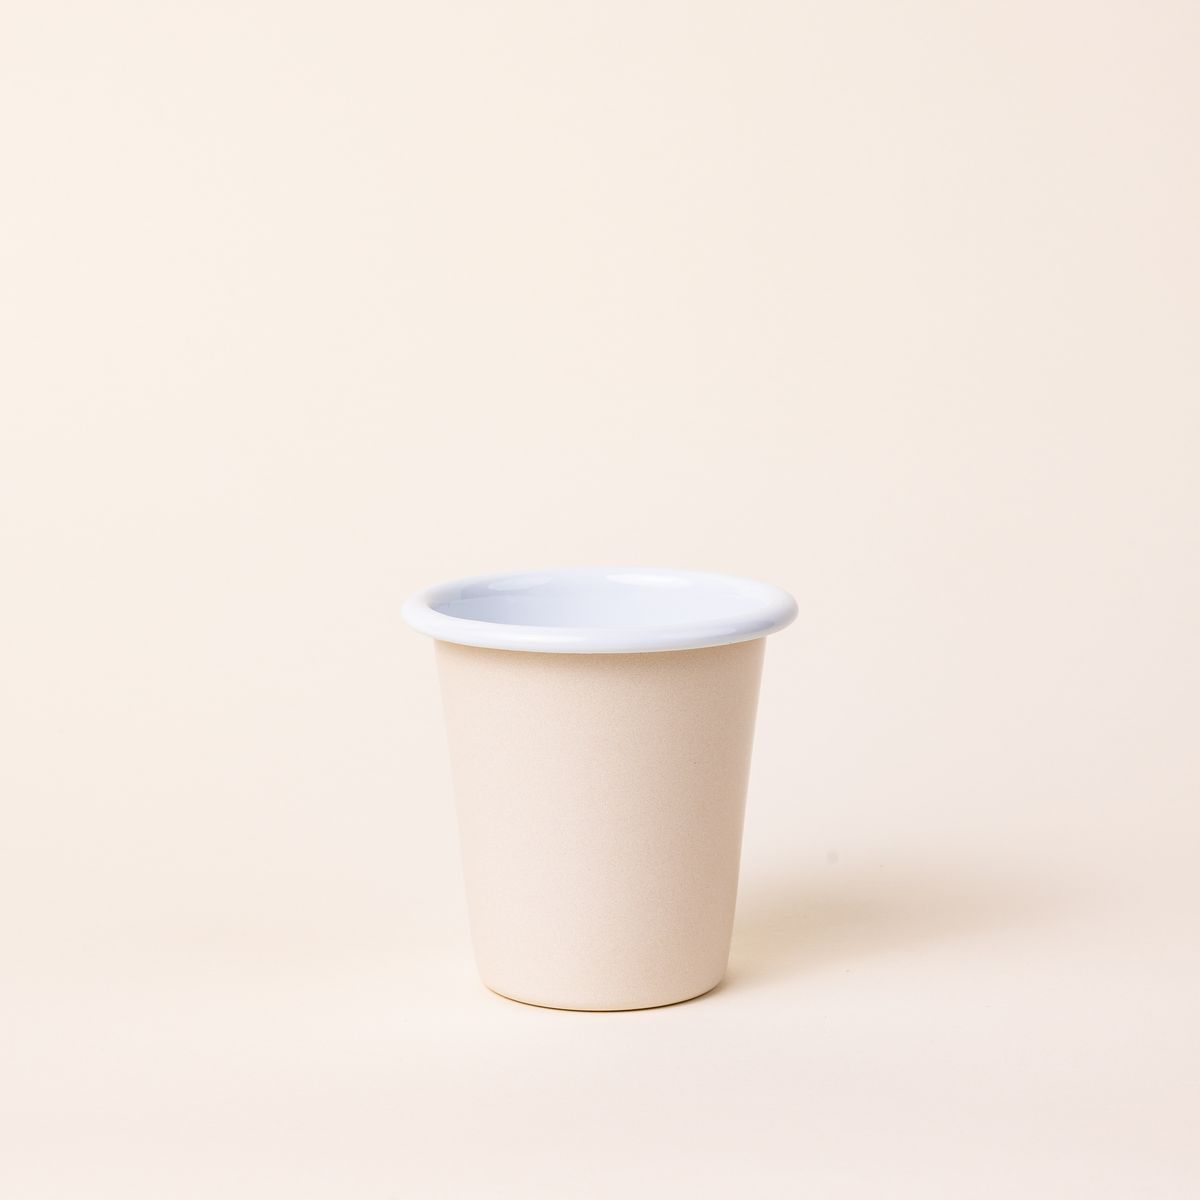 A short enamel cup with a cream exterior and white interior